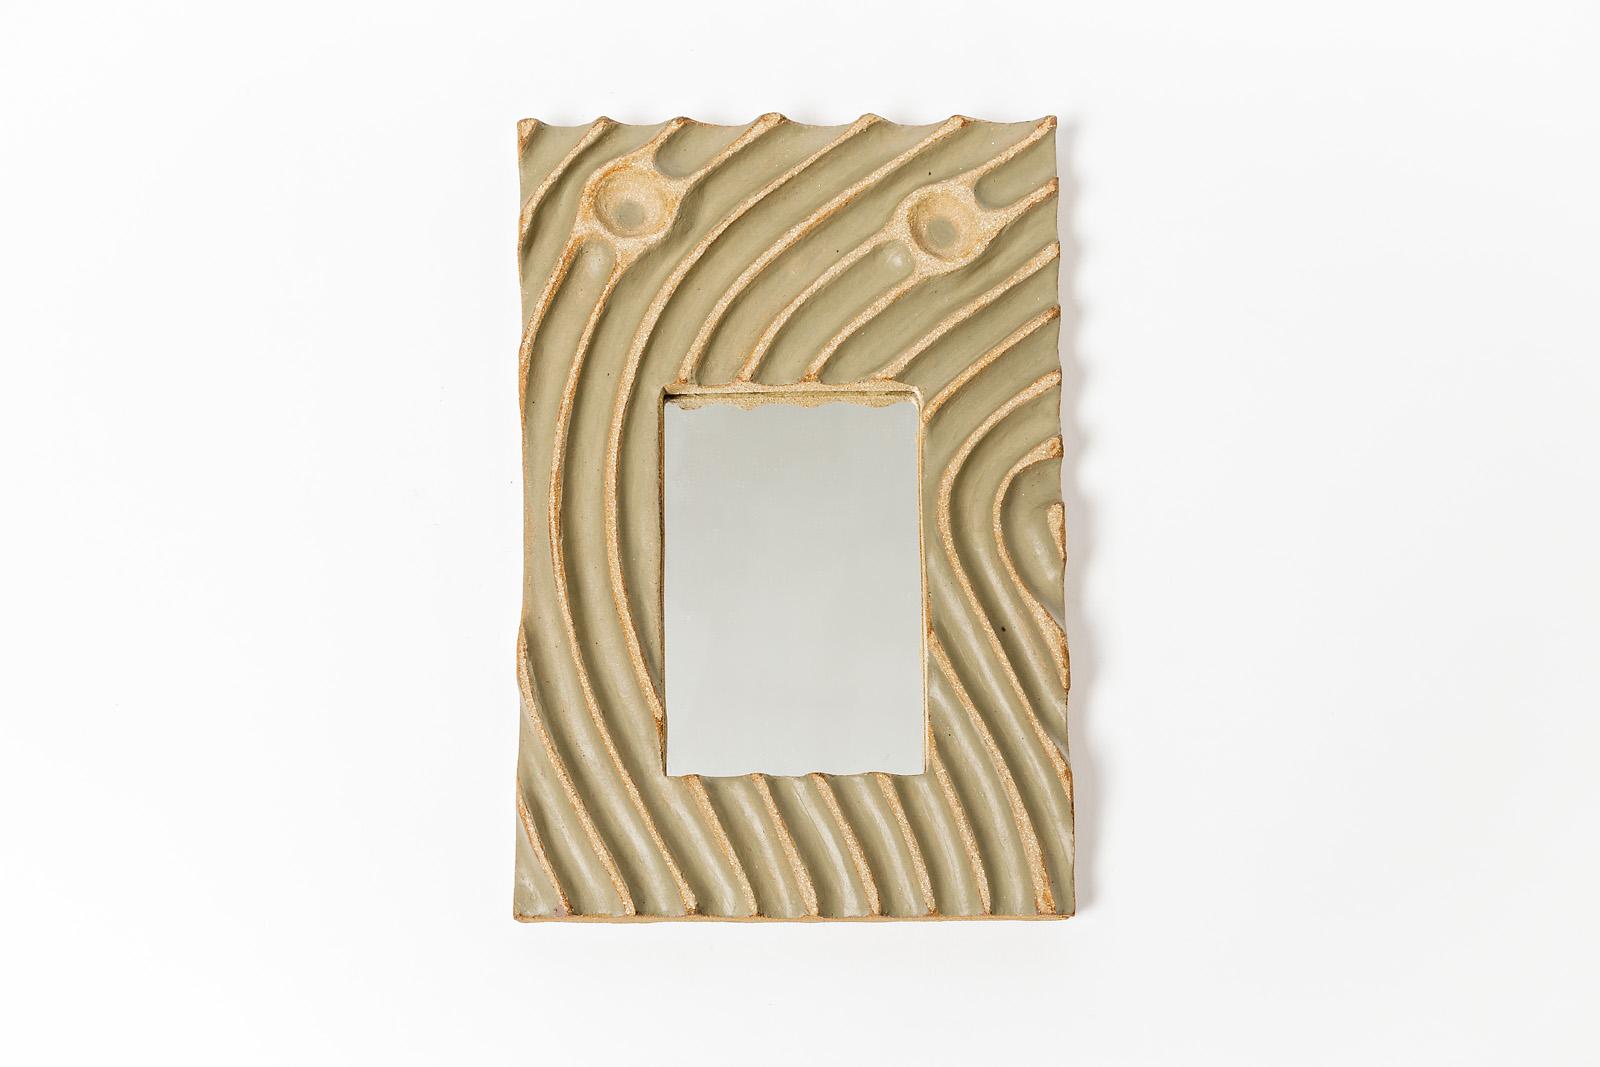 Set of Five Ceramic Mirrors by Hervé Taquet, 2019 For Sale 2